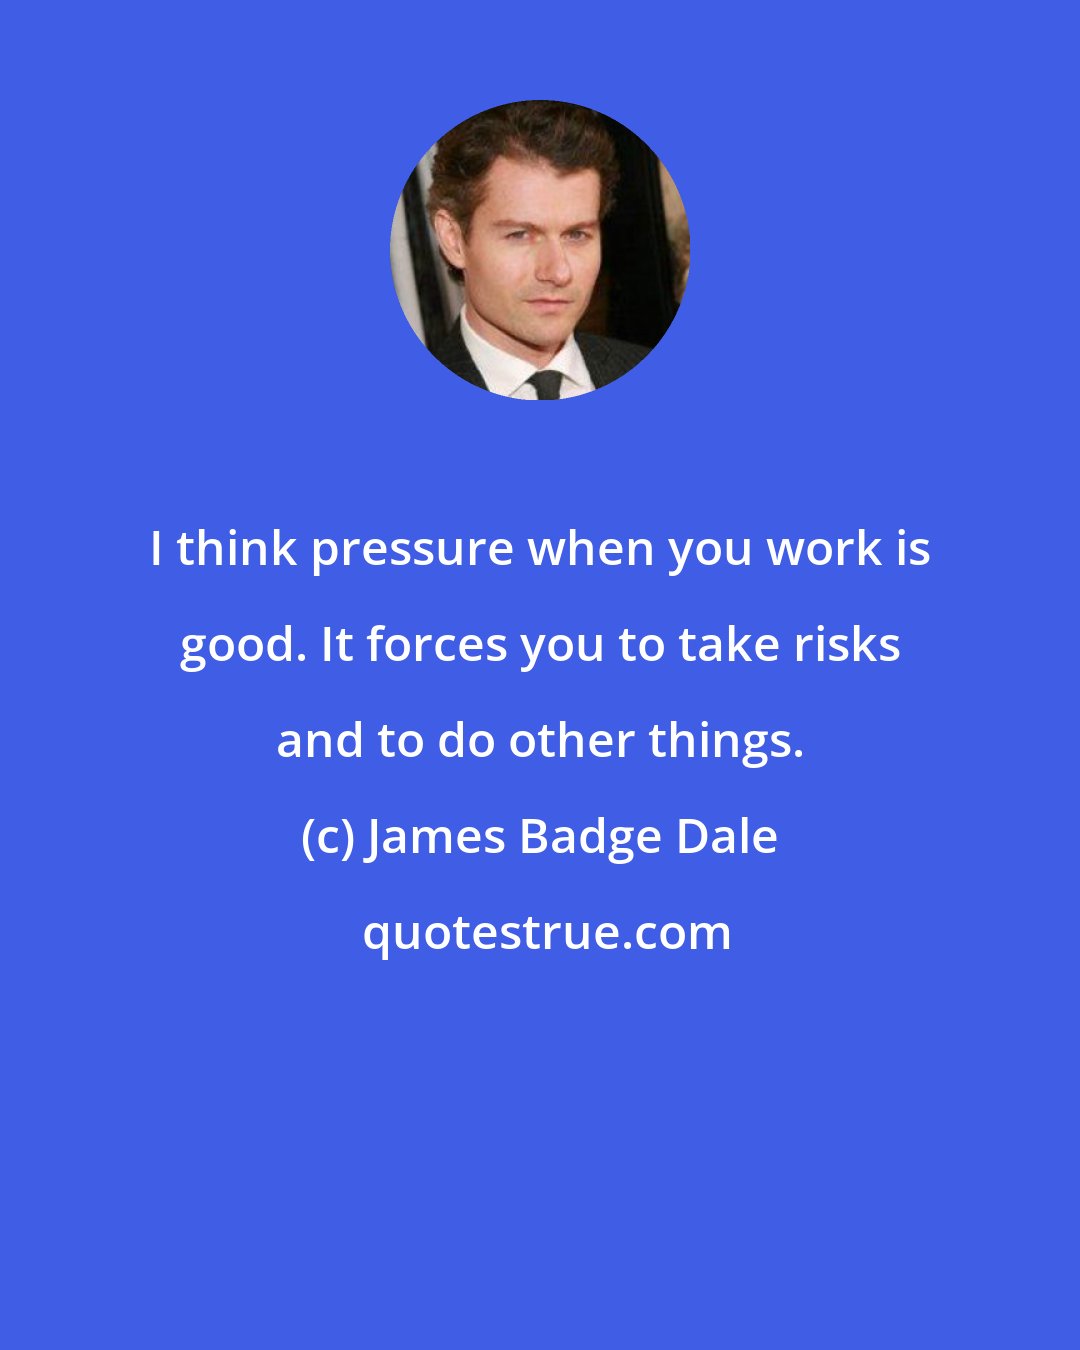 James Badge Dale: I think pressure when you work is good. It forces you to take risks and to do other things.